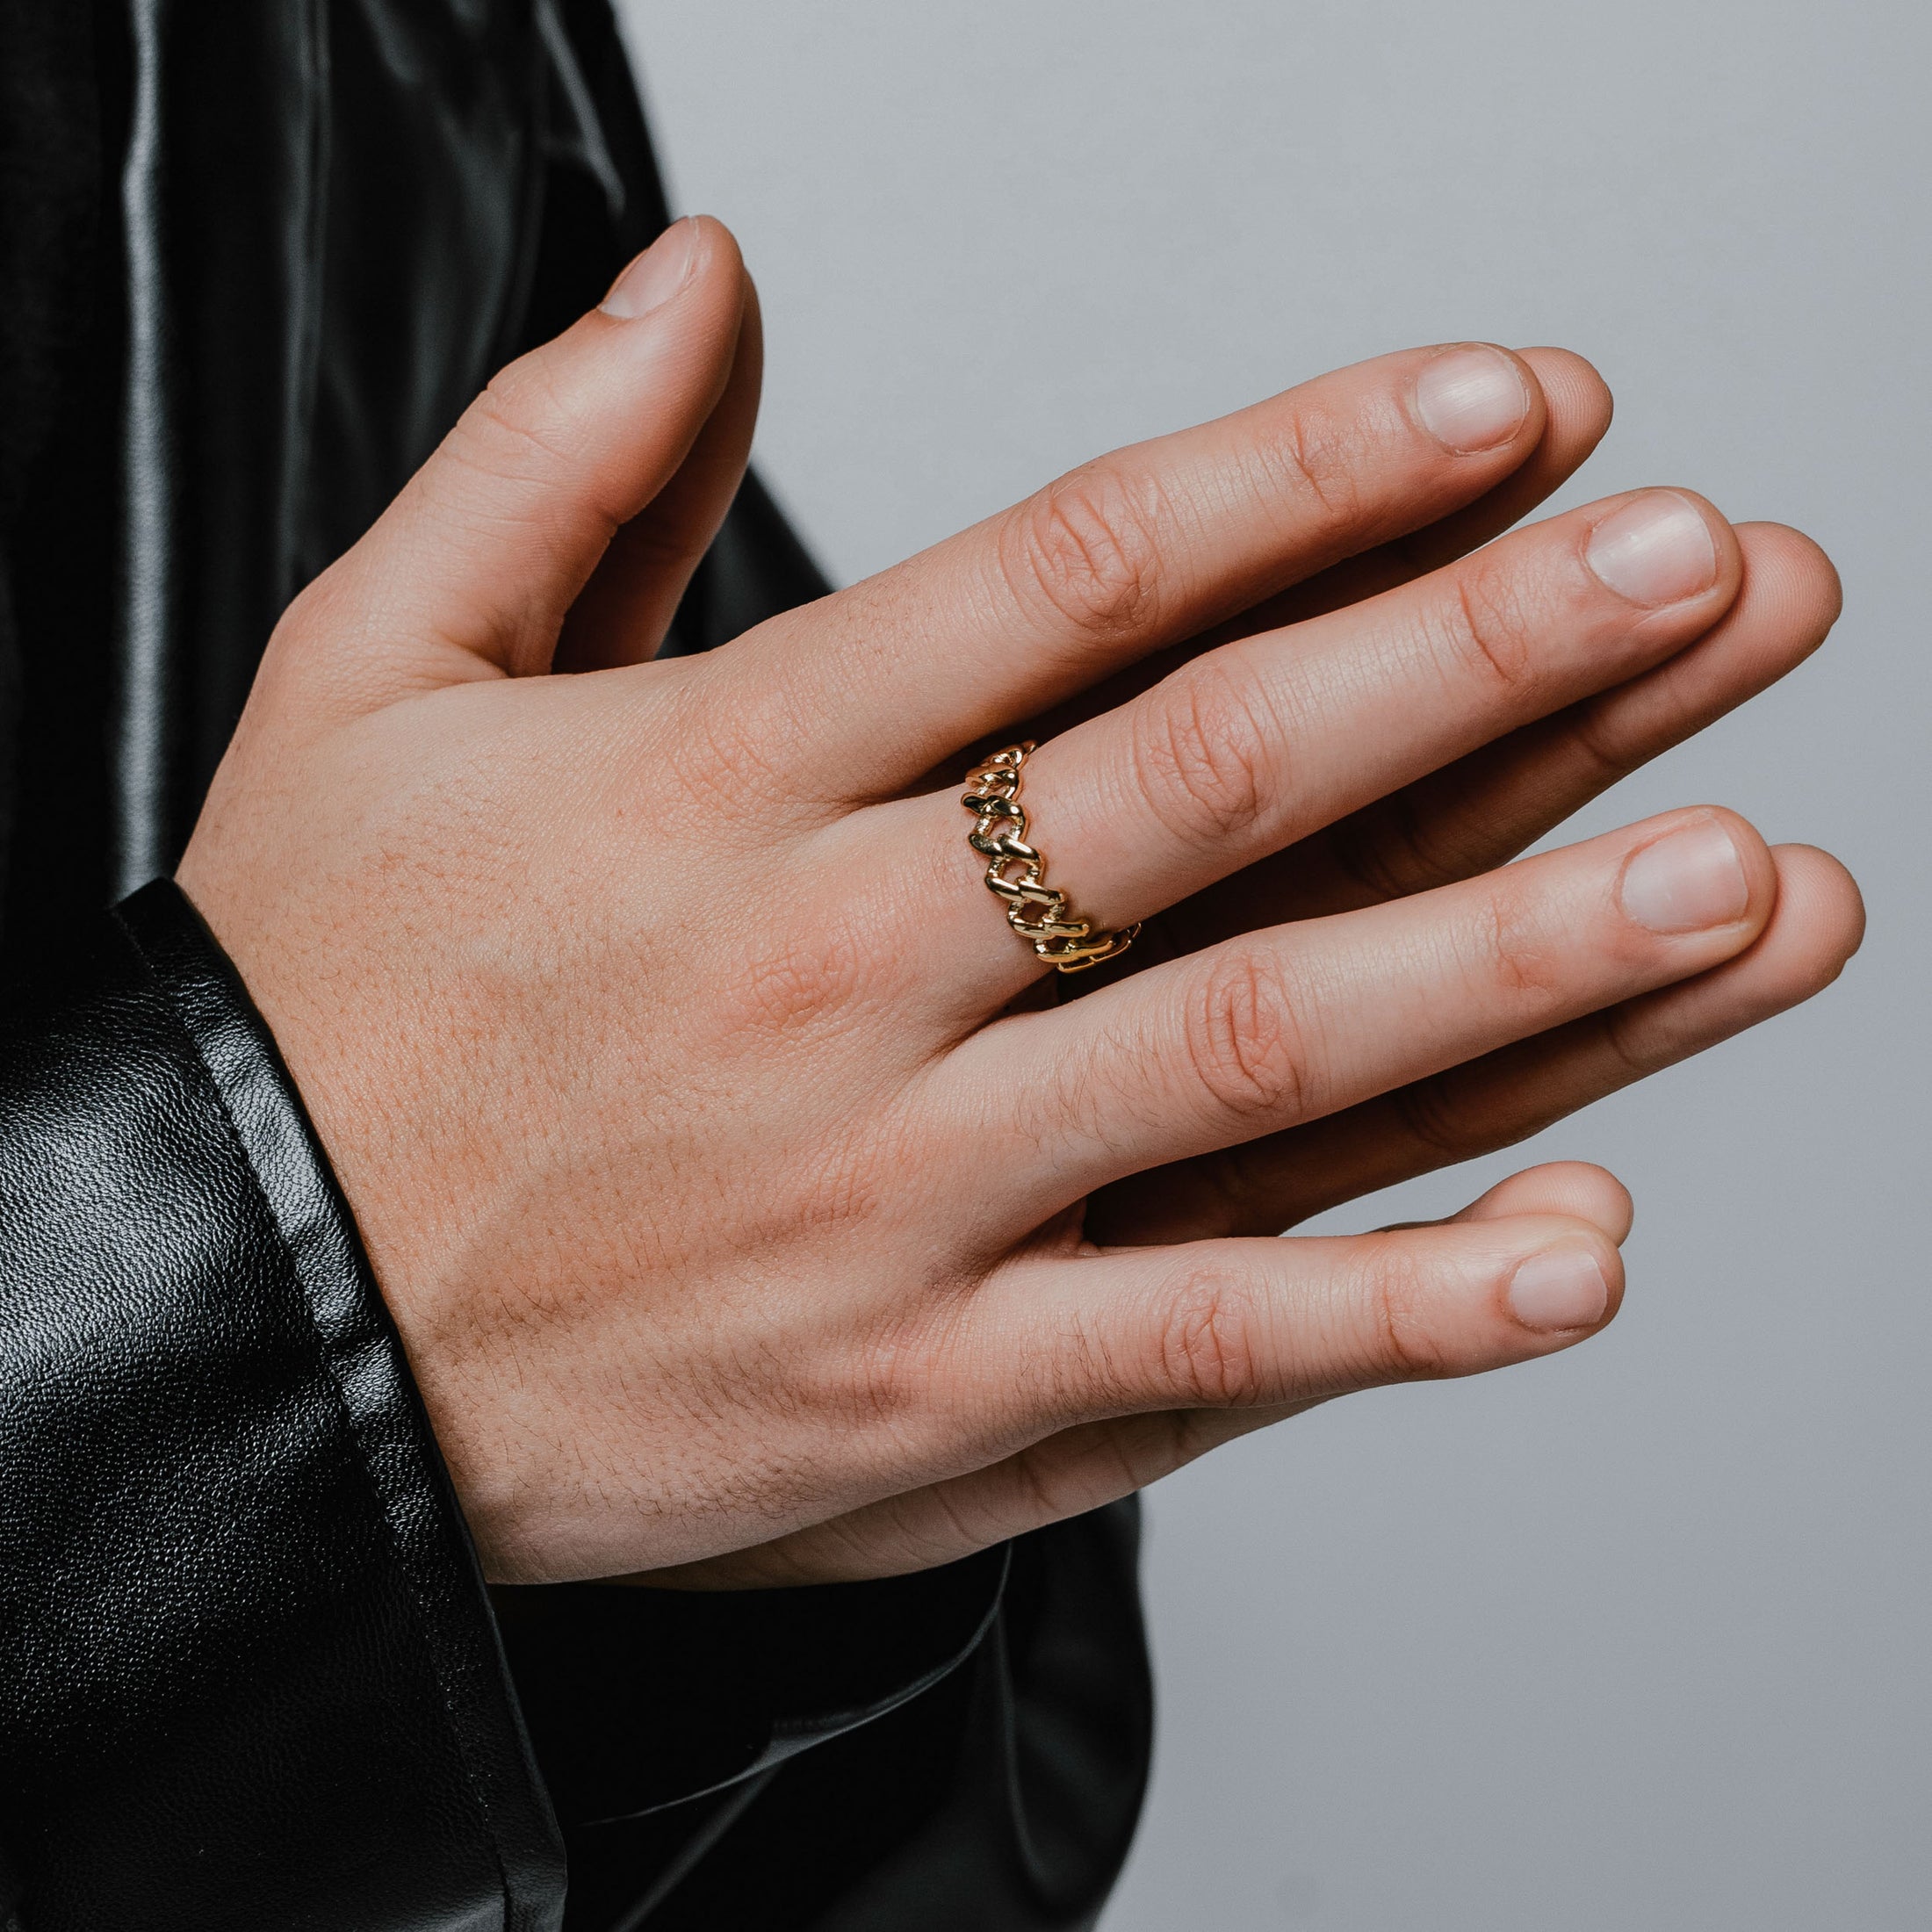 Vitaly Tilt Ring | 100% Recycled Stainless Steel Accessories